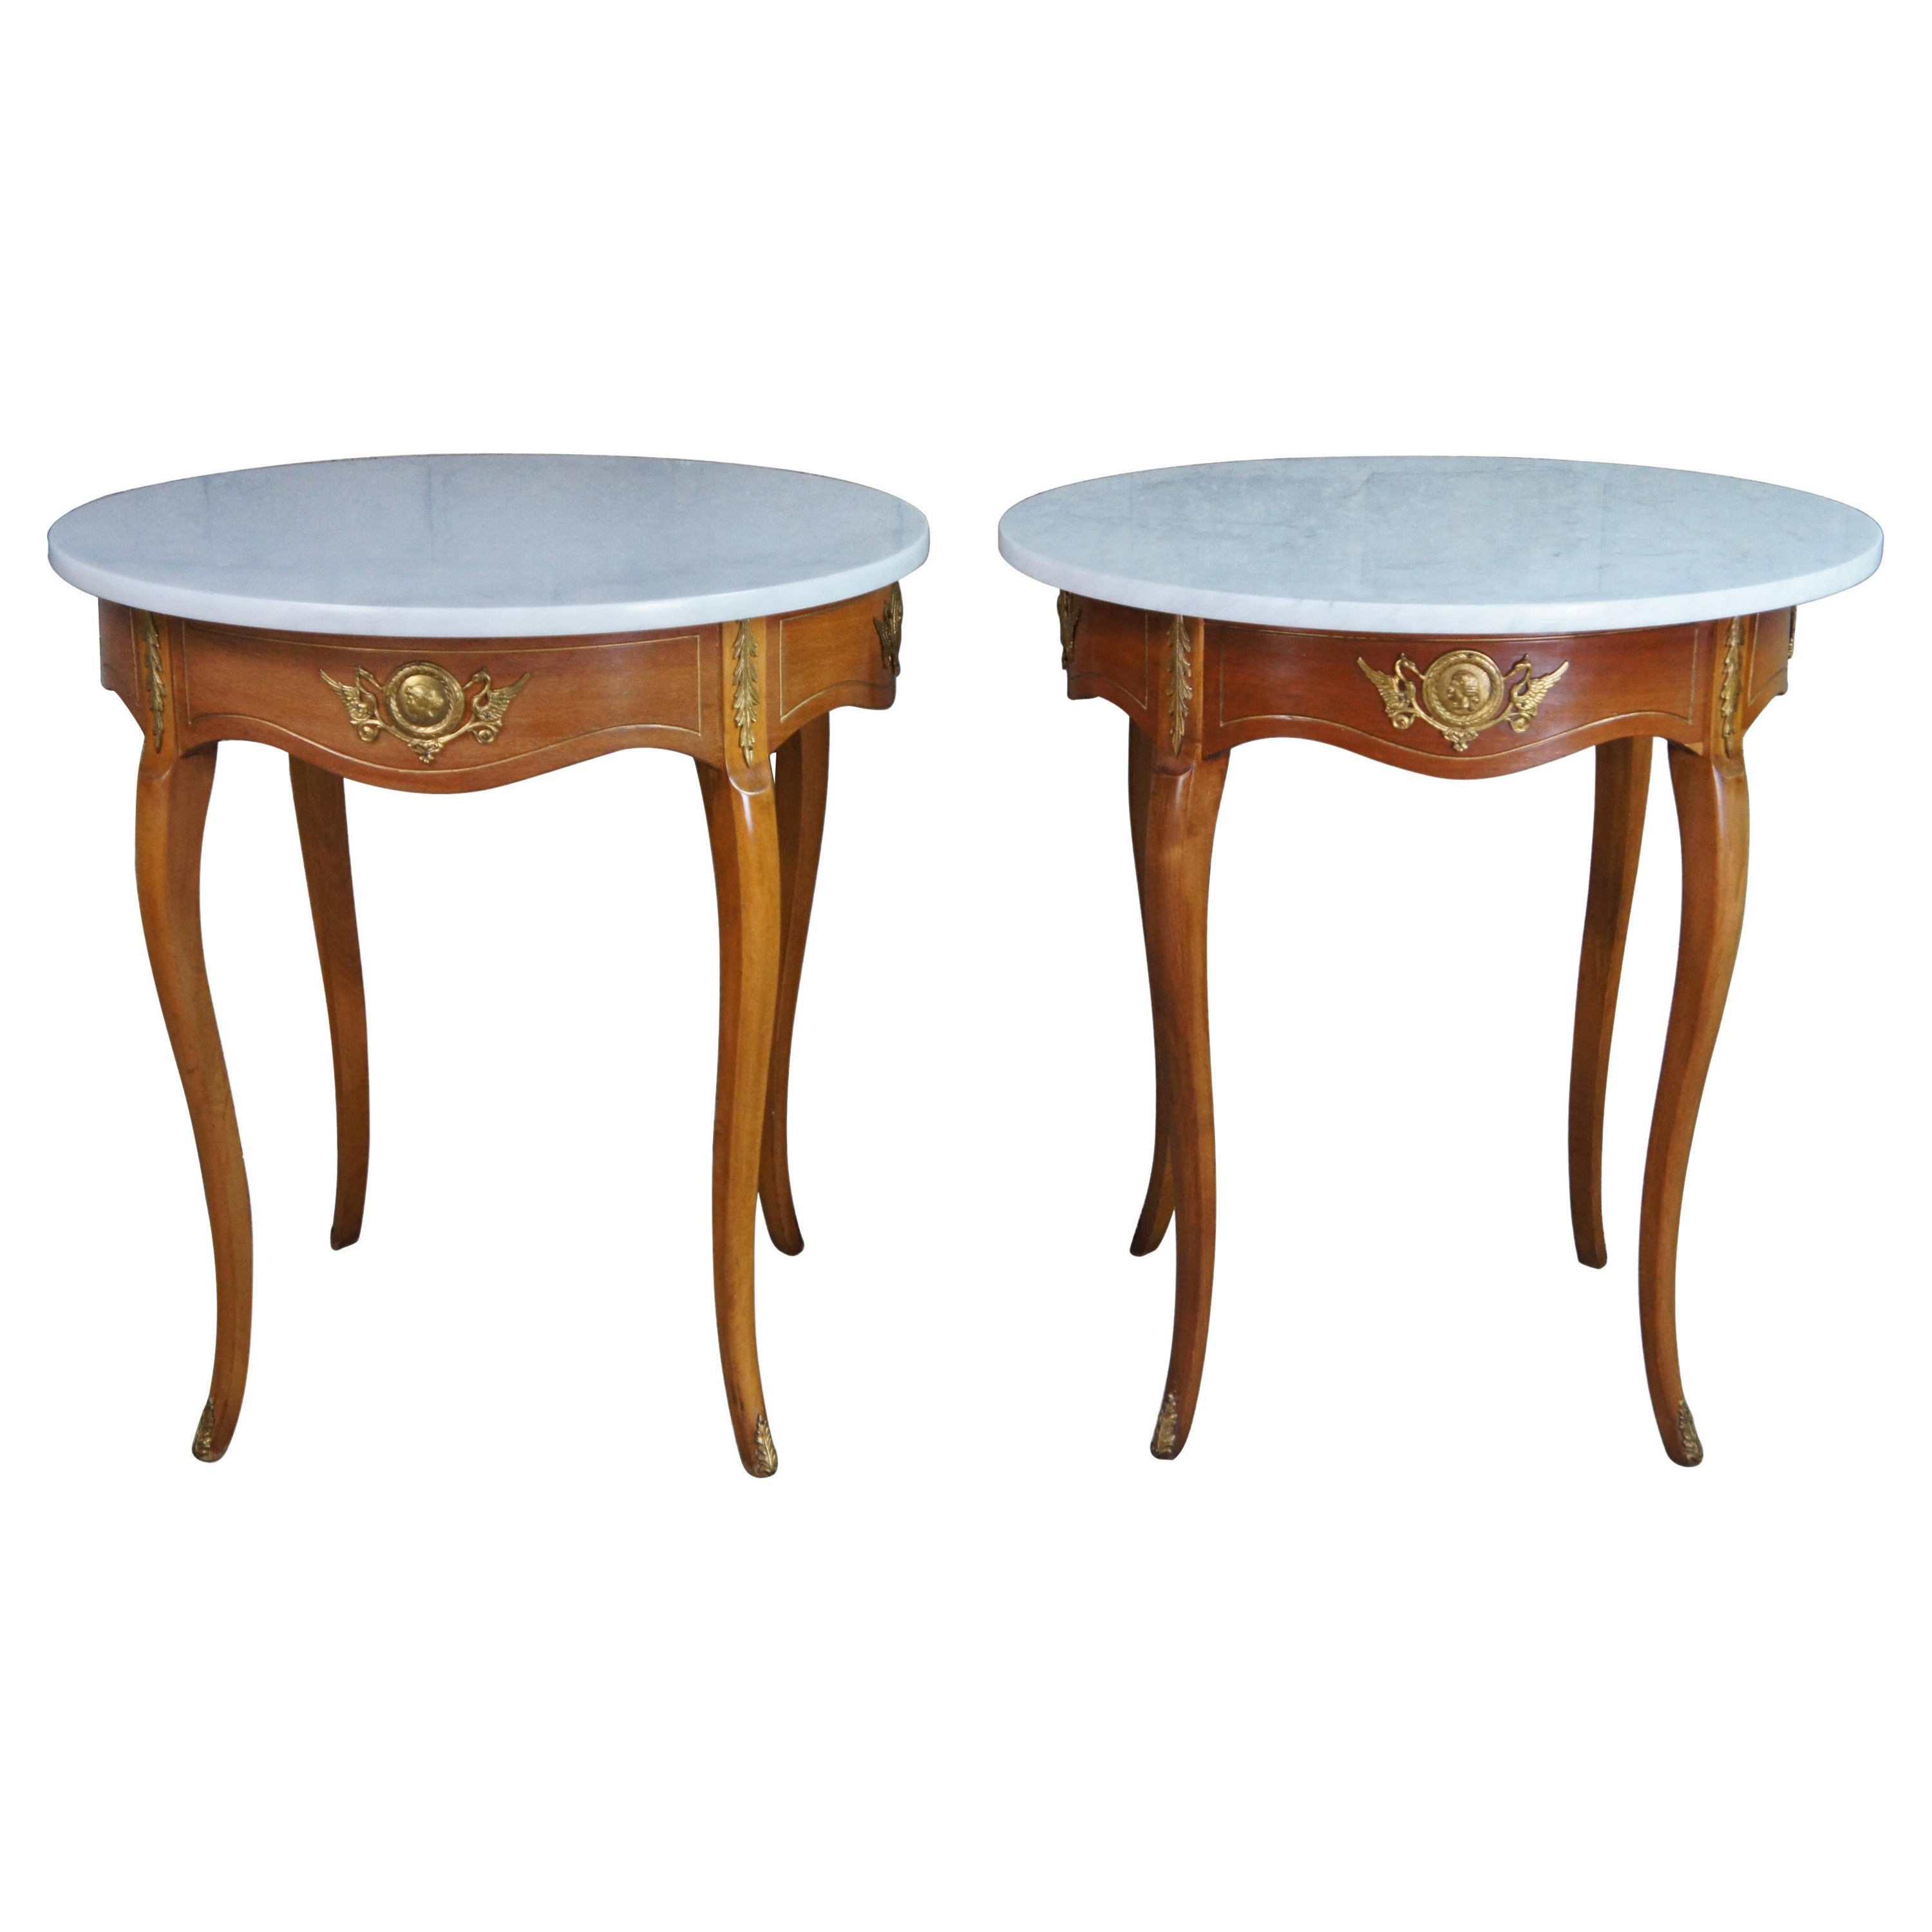 2 Antique Italian Neoclassical Round Marble Fruitwood Gueridon Accent End Tables